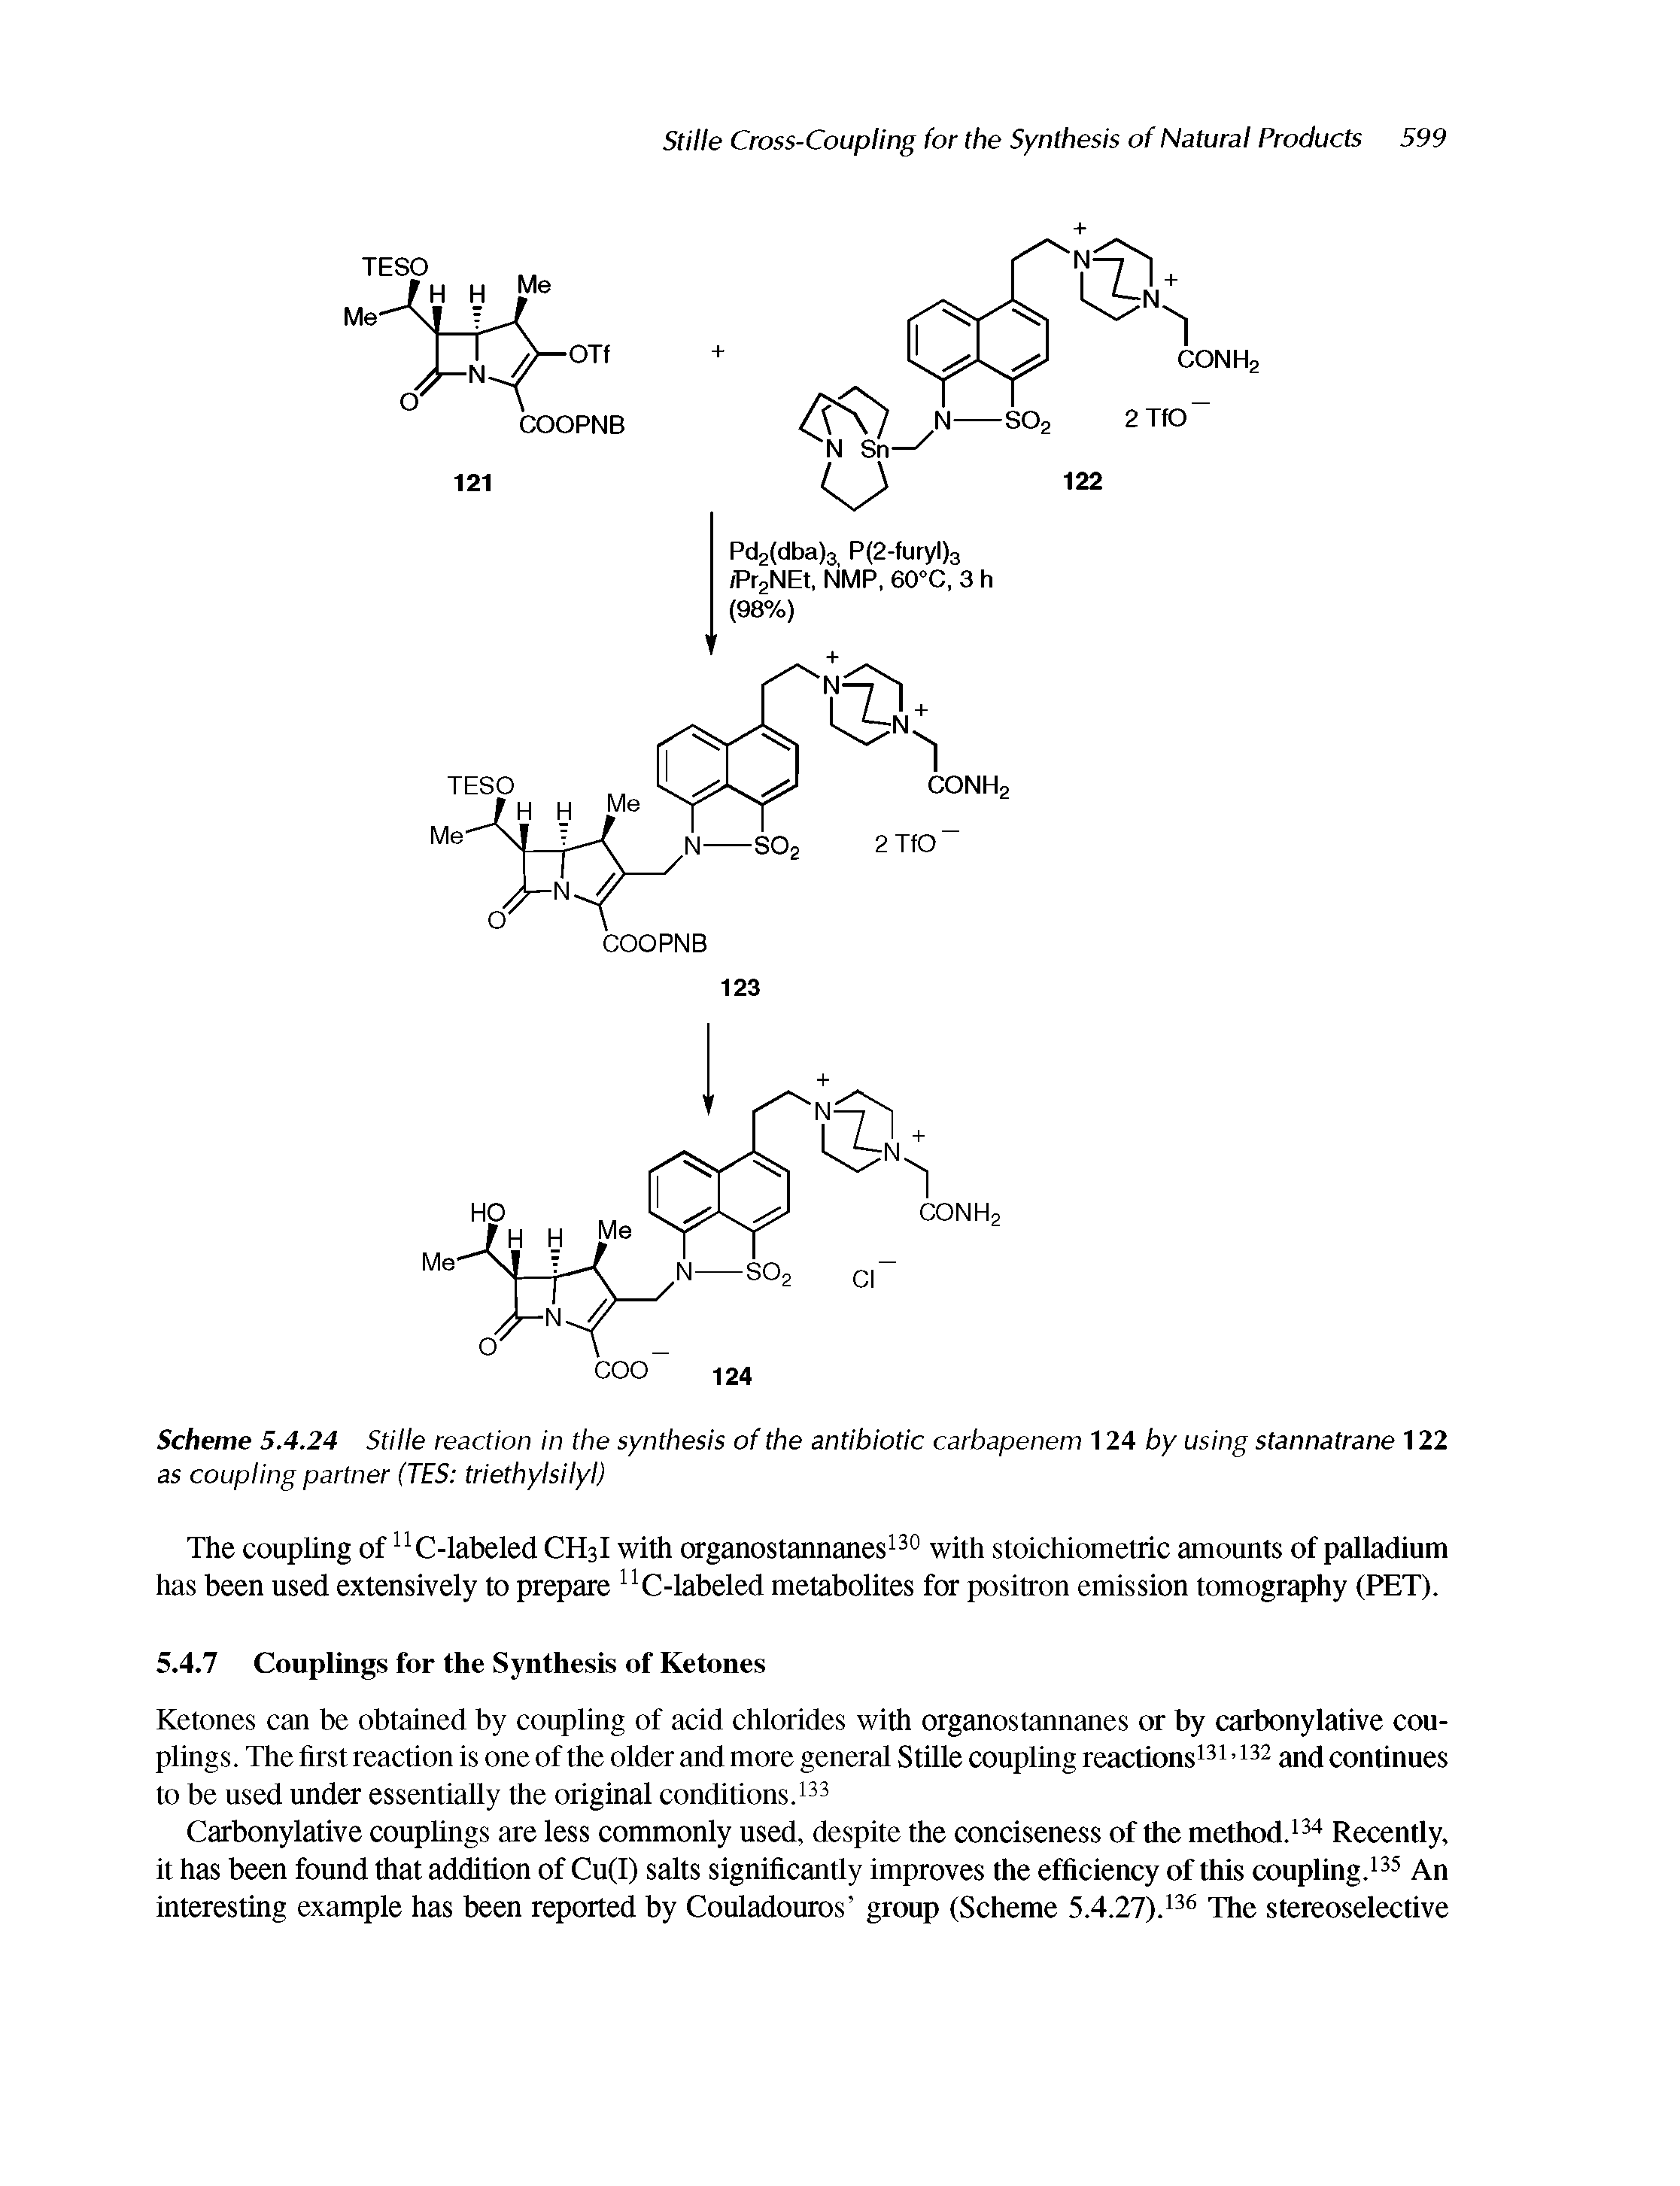 Scheme 5.4.24 Stille reaction in the synthesis of the antibiotic carbapenem 124 by using stannatrane 122 as coupling partner (TES triethylsilyl)...